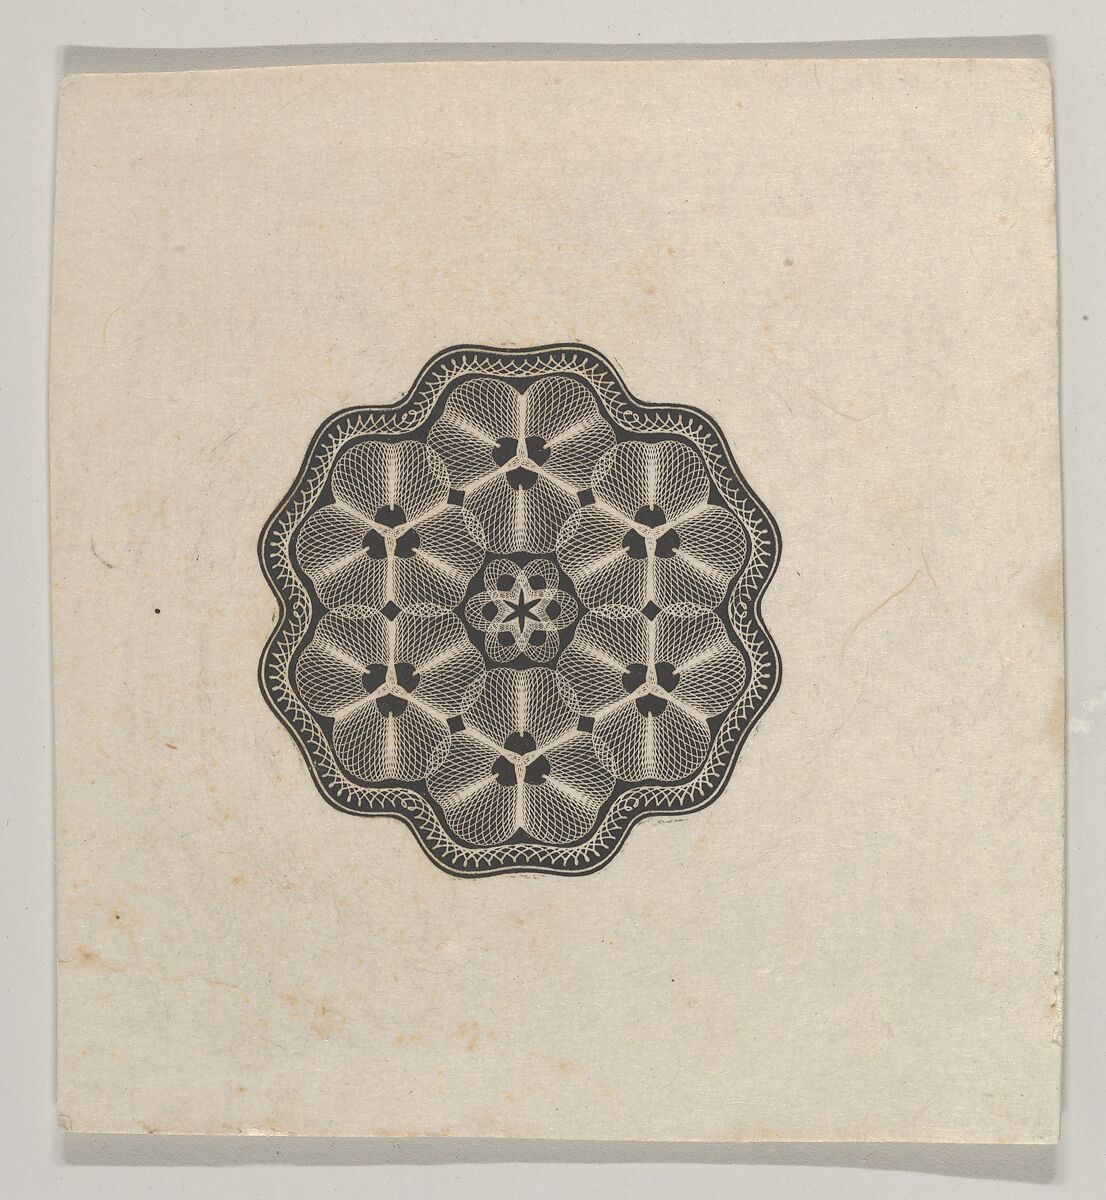 Banknote motif: a small six lobed ornament with a rope border, the interior adorned with lathe work florets, Associated with Cyrus Durand (American, 1787–1868), Engraving; proof 